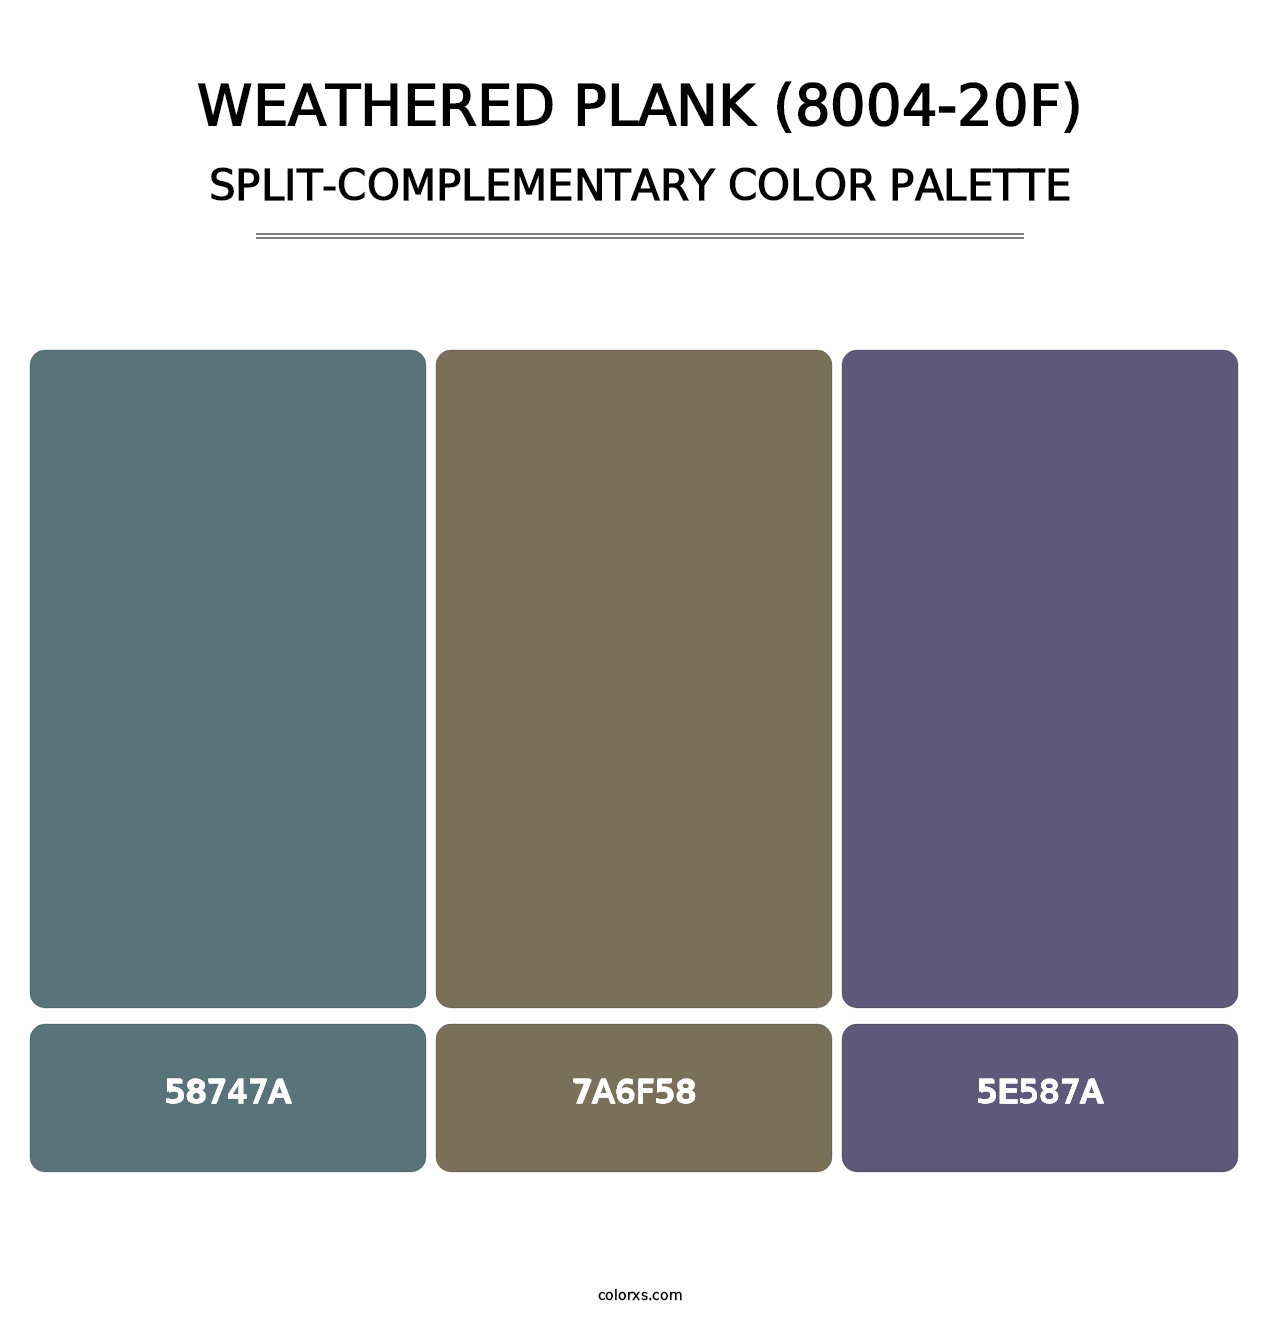 Weathered Plank (8004-20F) - Split-Complementary Color Palette